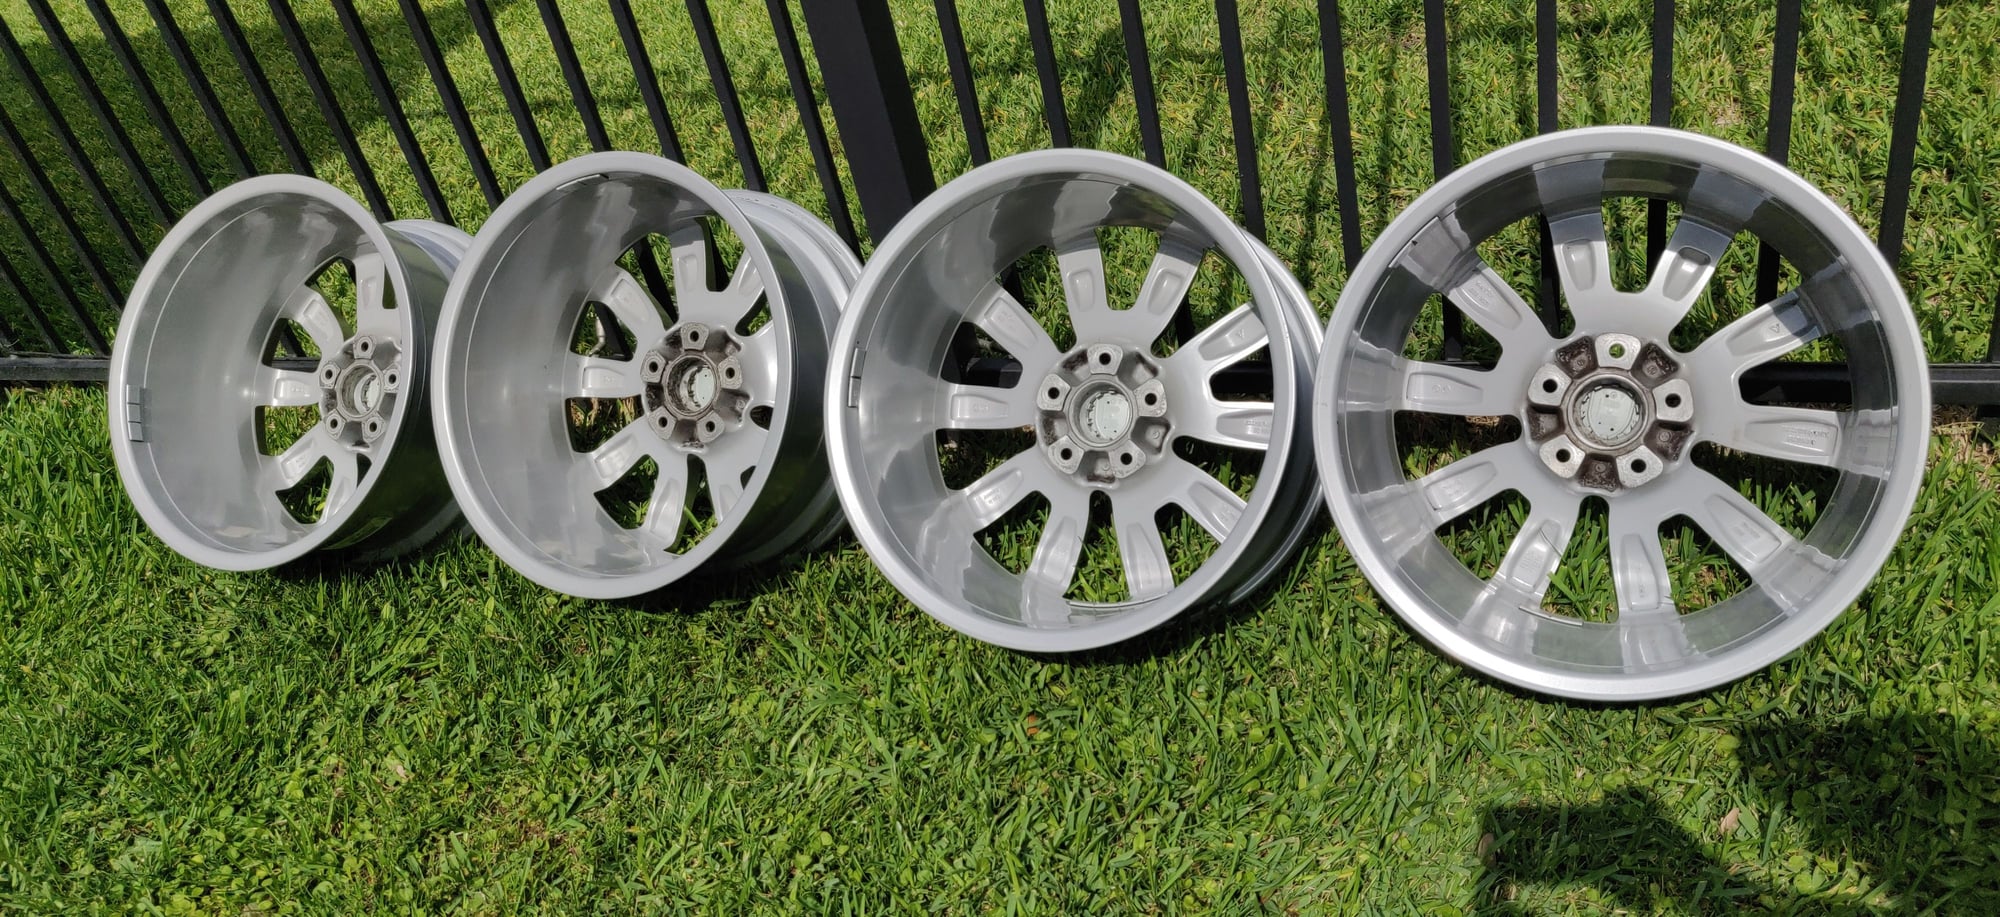 Wheels and Tires/Axles - Cayenne 20" 9jx20 ET 57 Wheel Rim 7P5601025B - Used - 2003 to 2016 Porsche Cayenne - Houston, TX 77009, United States